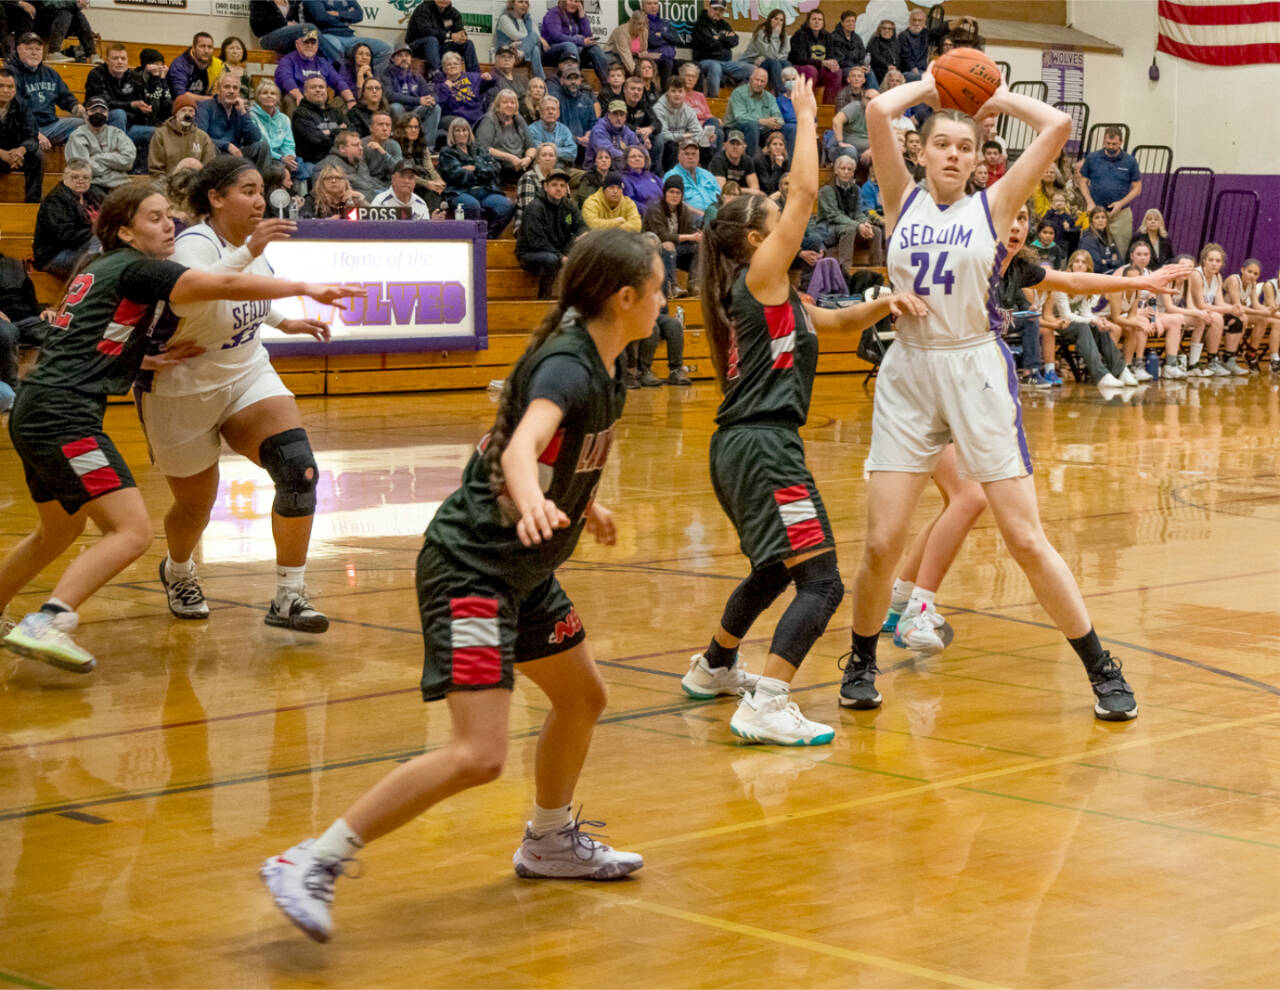 Sequim's Dani Herman looks to pass out of the defense of Neah Bay's Amber Swan, left, Allie Greene and Qwaapeys Greene on Tuesday in Sequim. Also in on the play is Sequim's Jelissa Julmist. (Emily Matthiessen/Olympic Peninsula News Group)